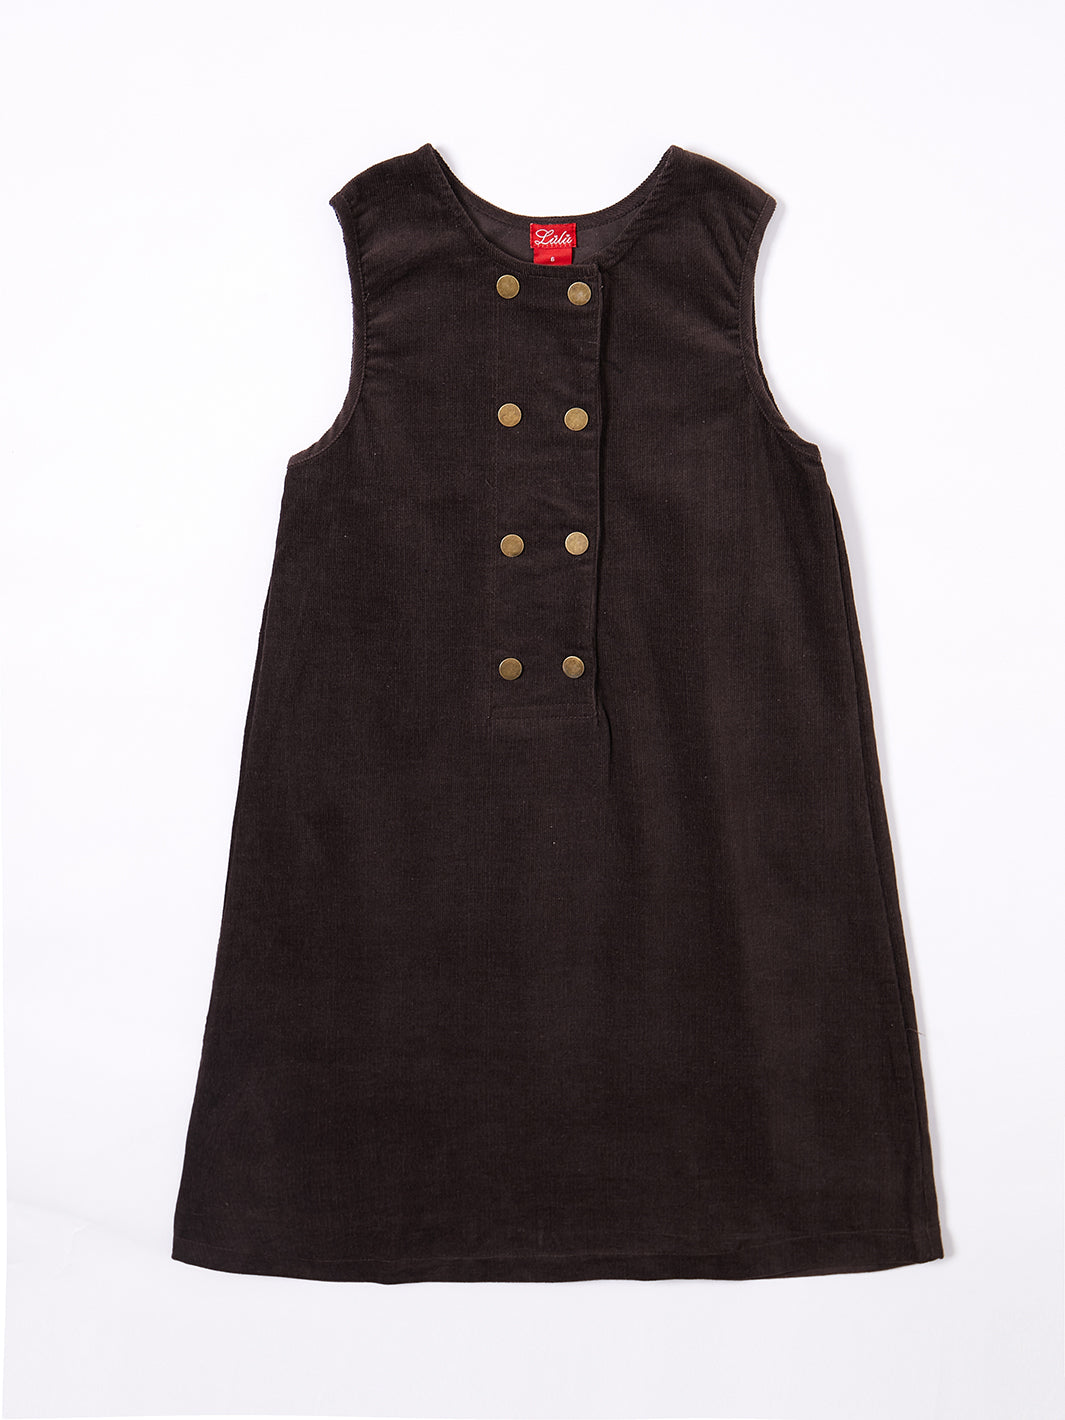 Corduroy Double Breasted Gold Button Dress - Brown